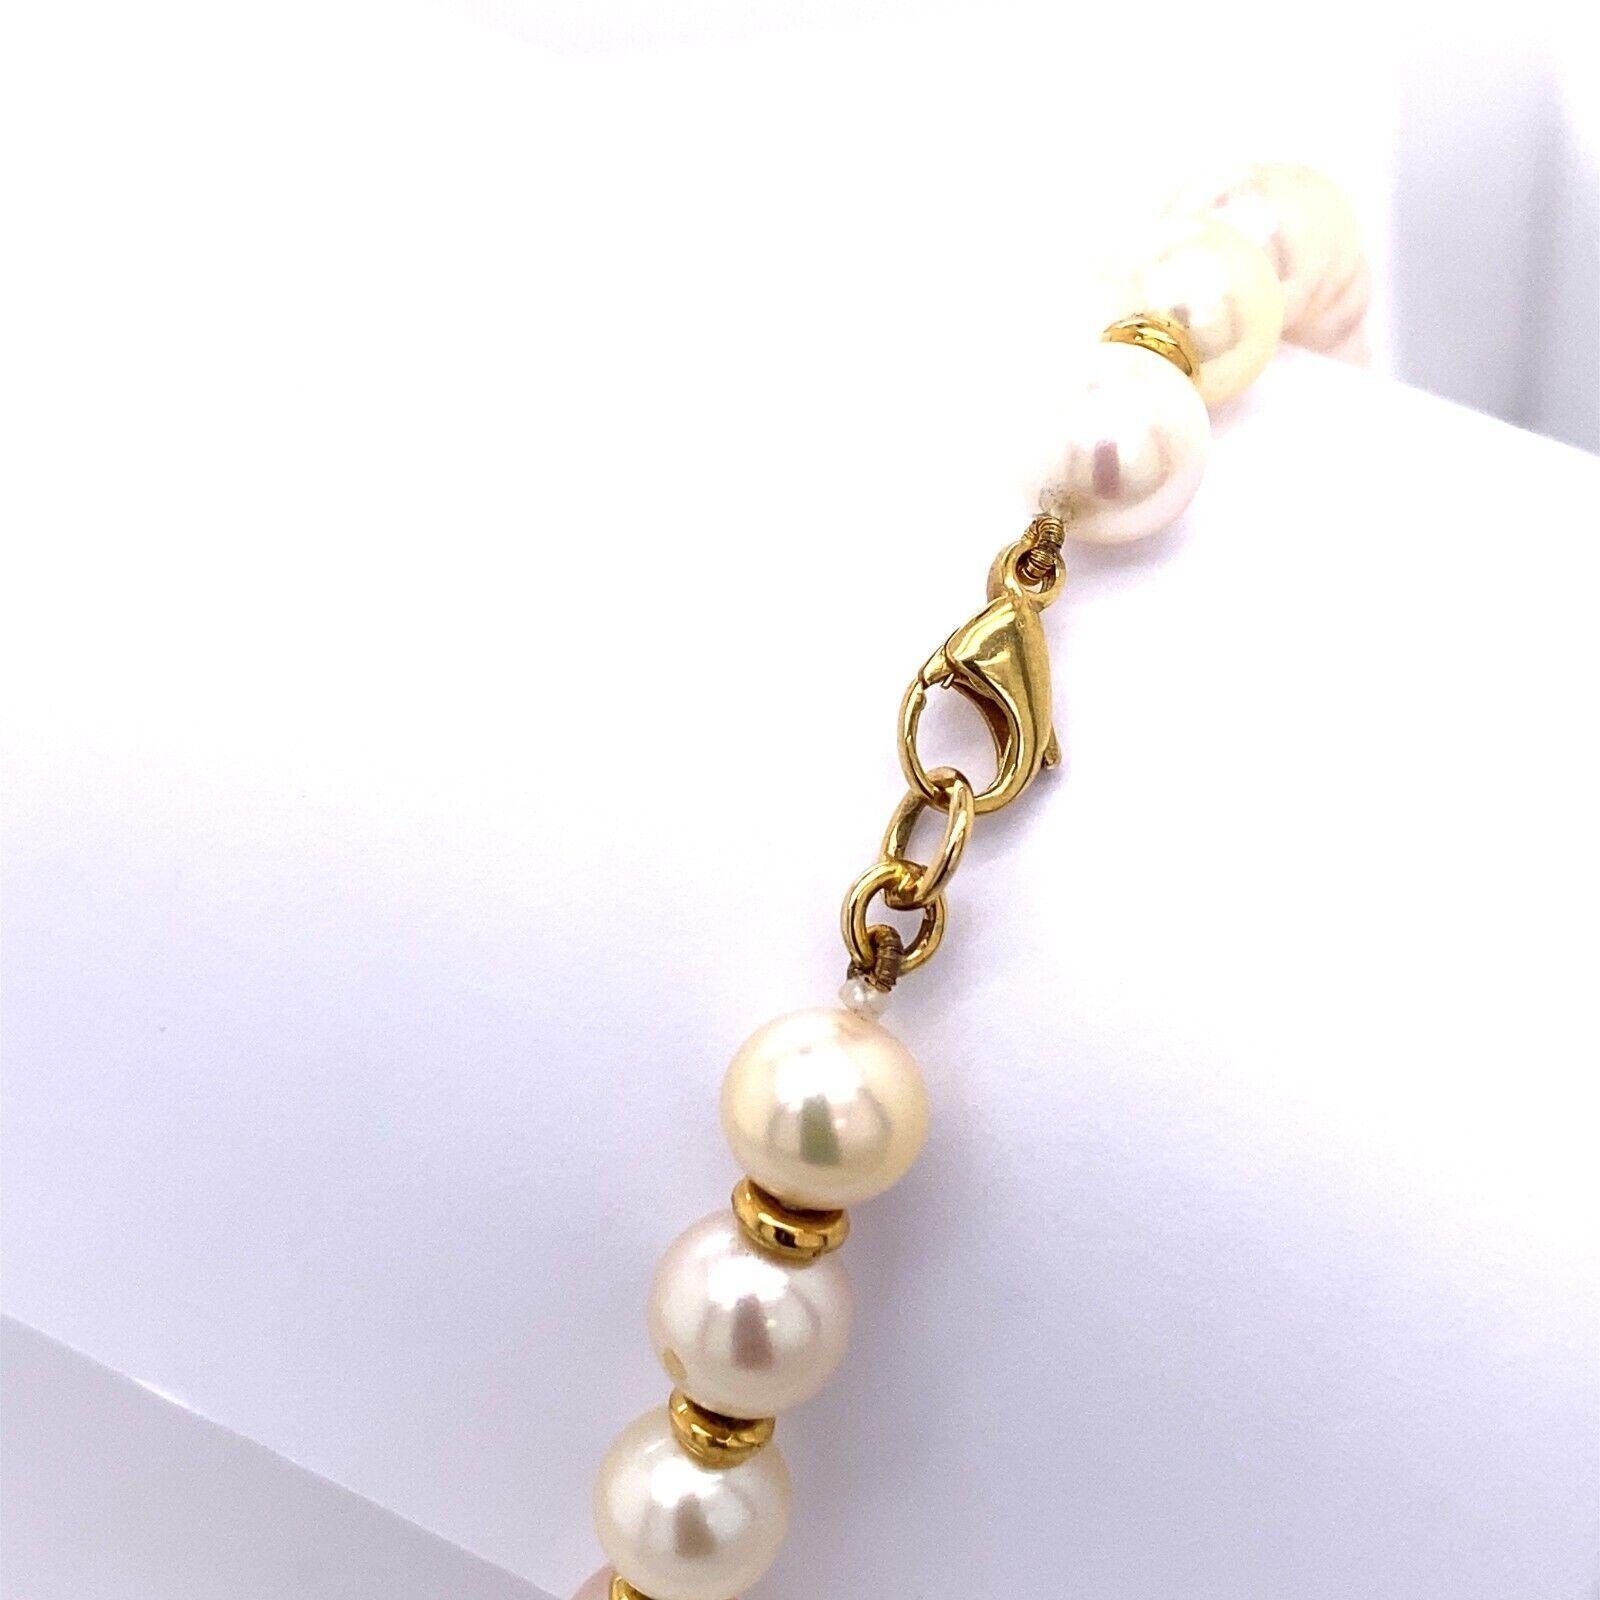 Women's Perfect Matching 7mm Cultured Pearl Bracelet with 9ct Gold Beads in Between For Sale